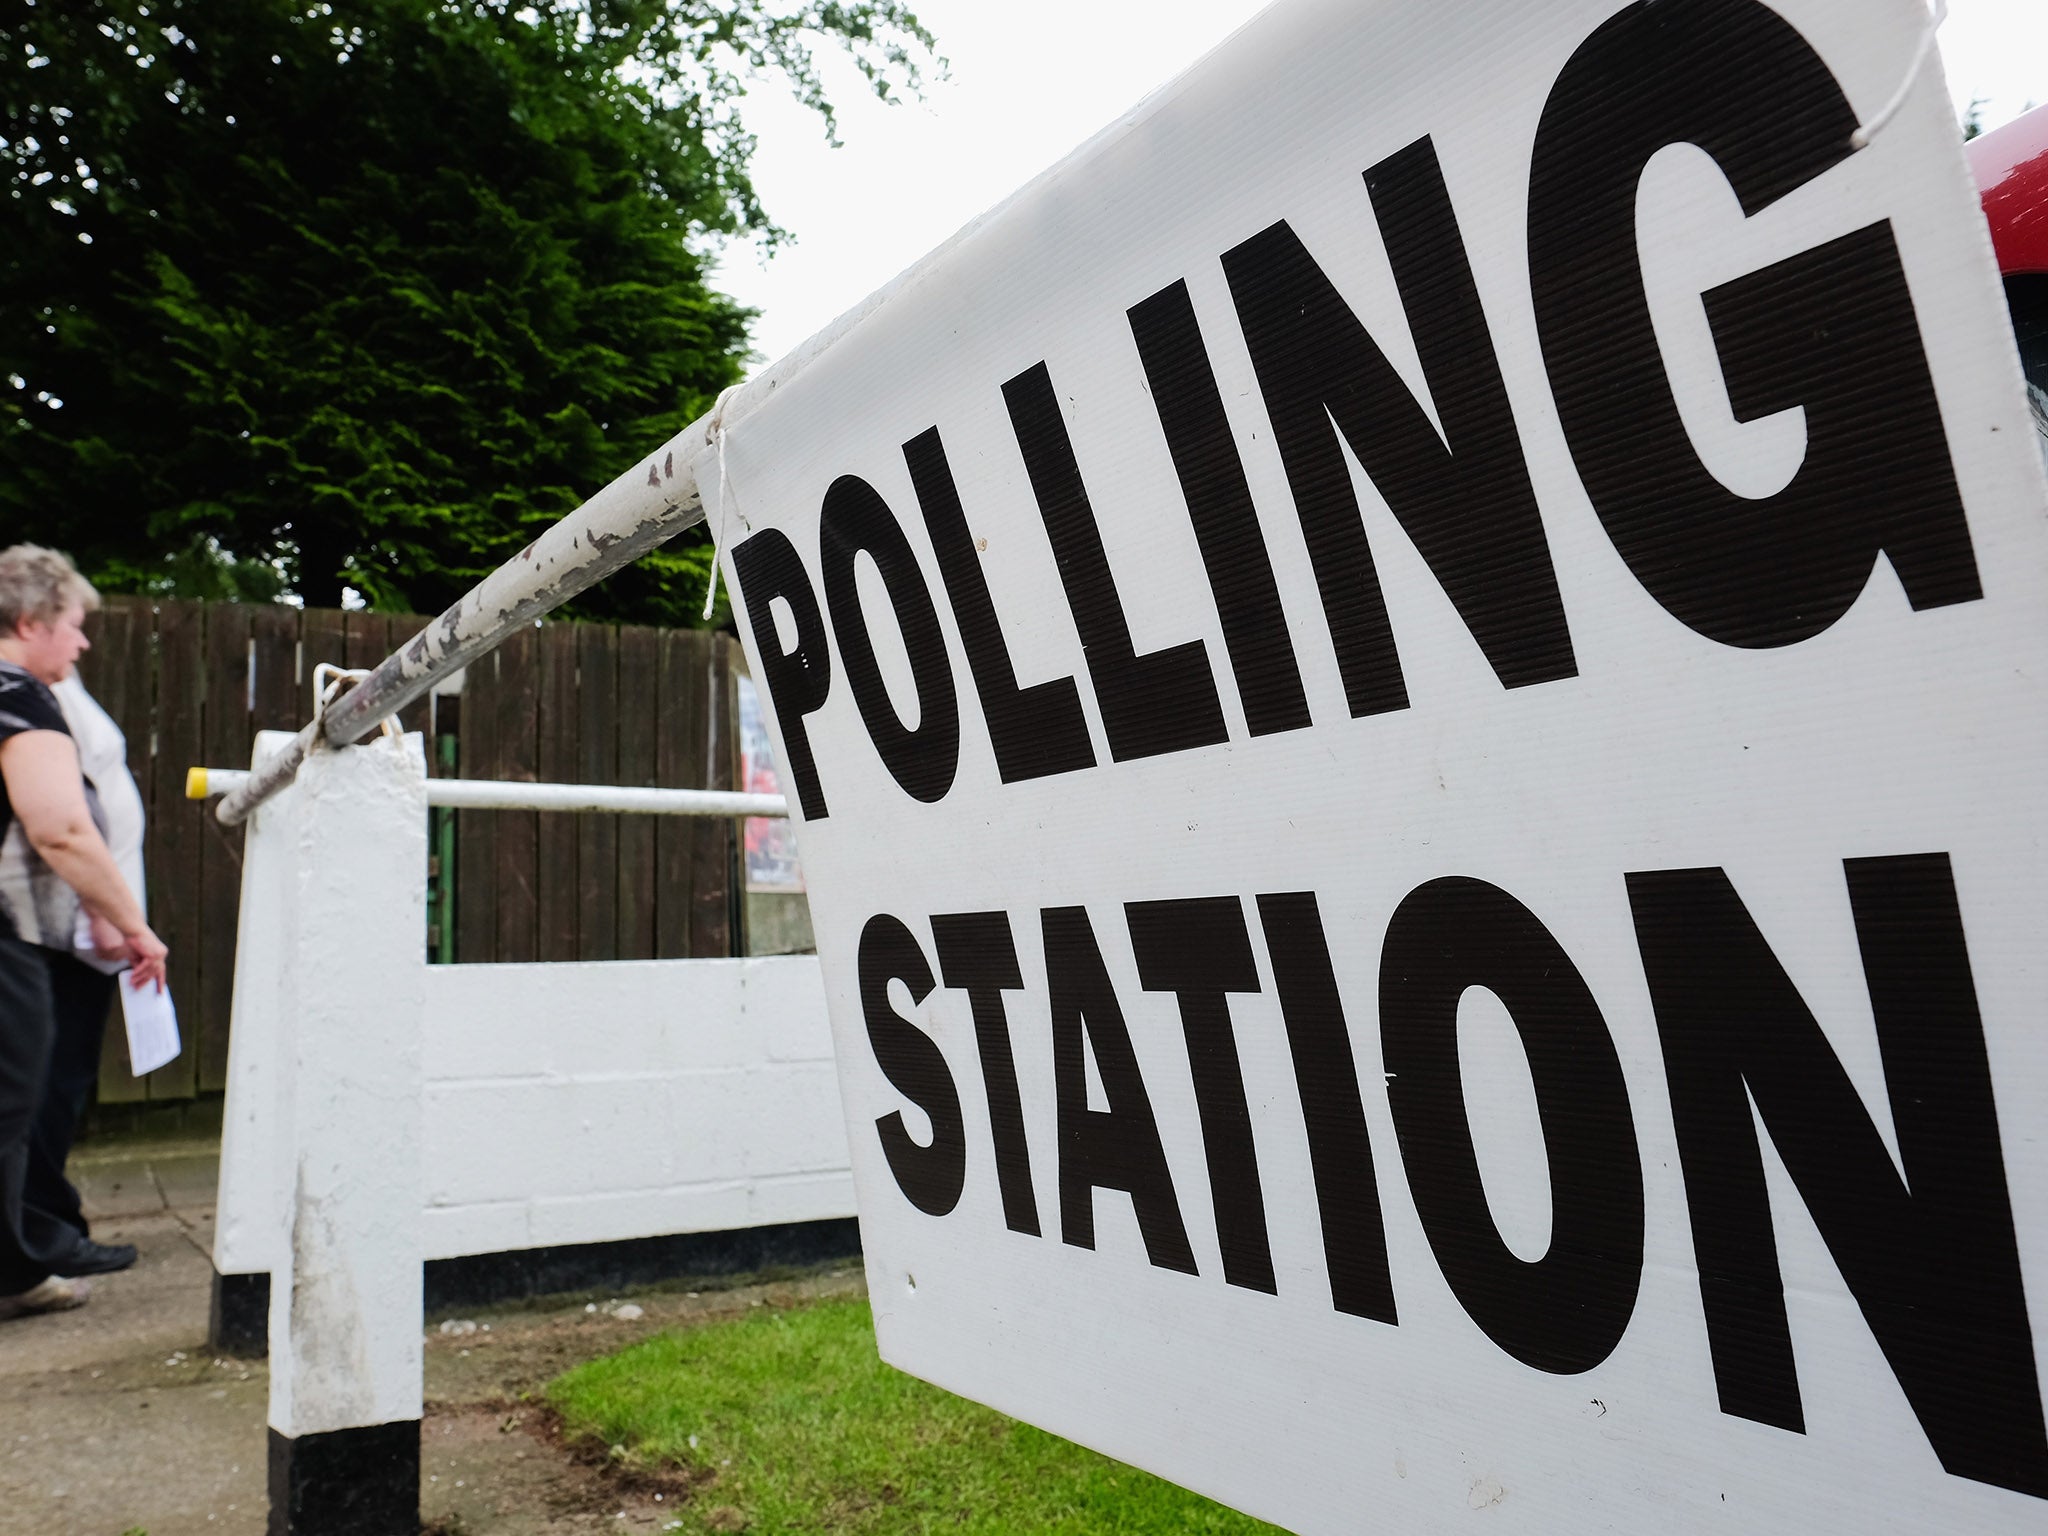 The largest number of voters in history will be eligible to vote in the EU referendum